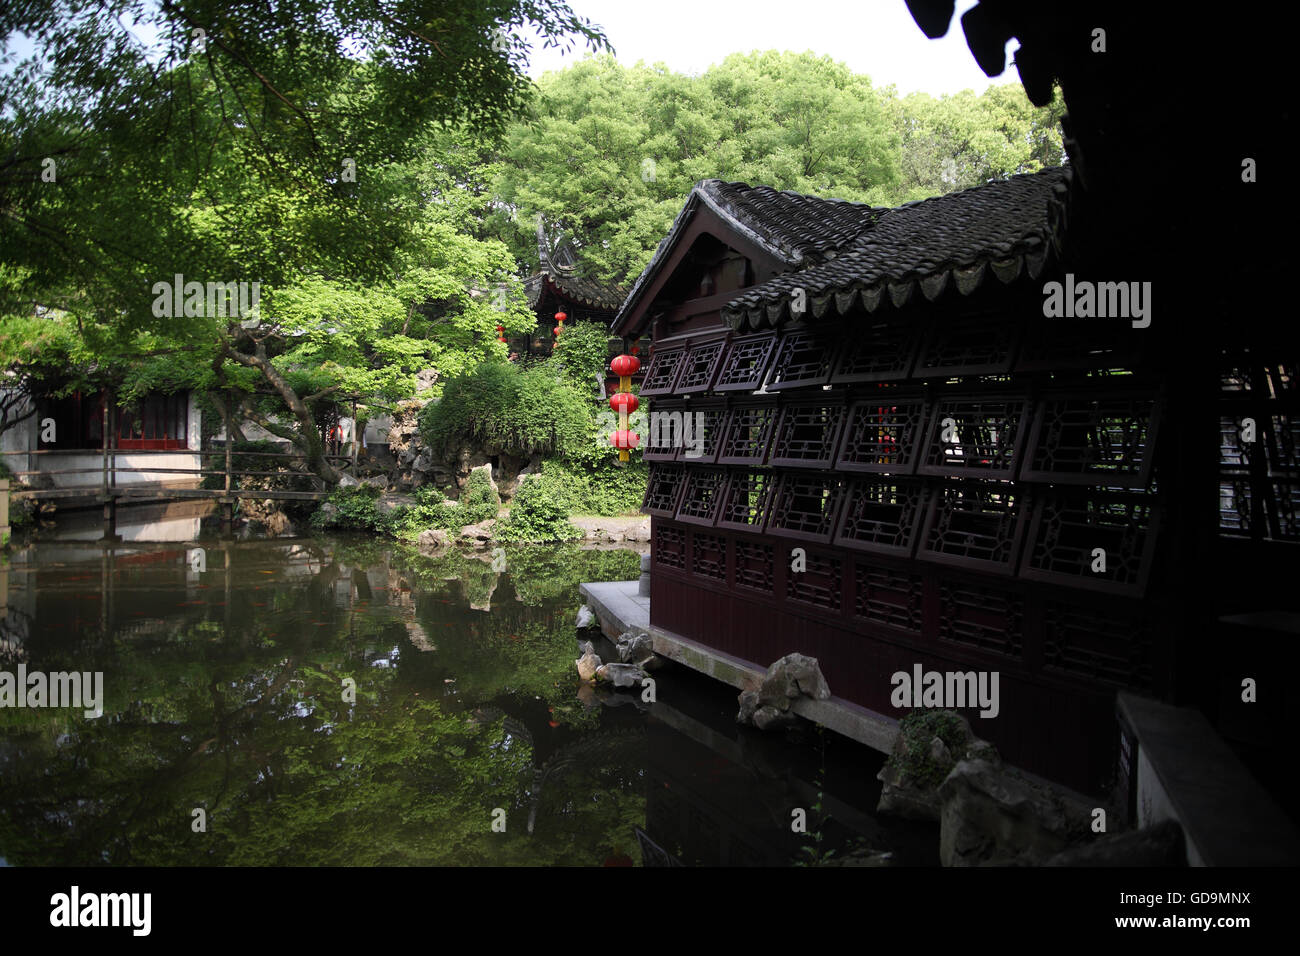 A house, a pond, vegetation and Chinese lanterns in the Tuisi Garden, a typical old Chinese garden built in 1885. Tongli, China. Stock Photo